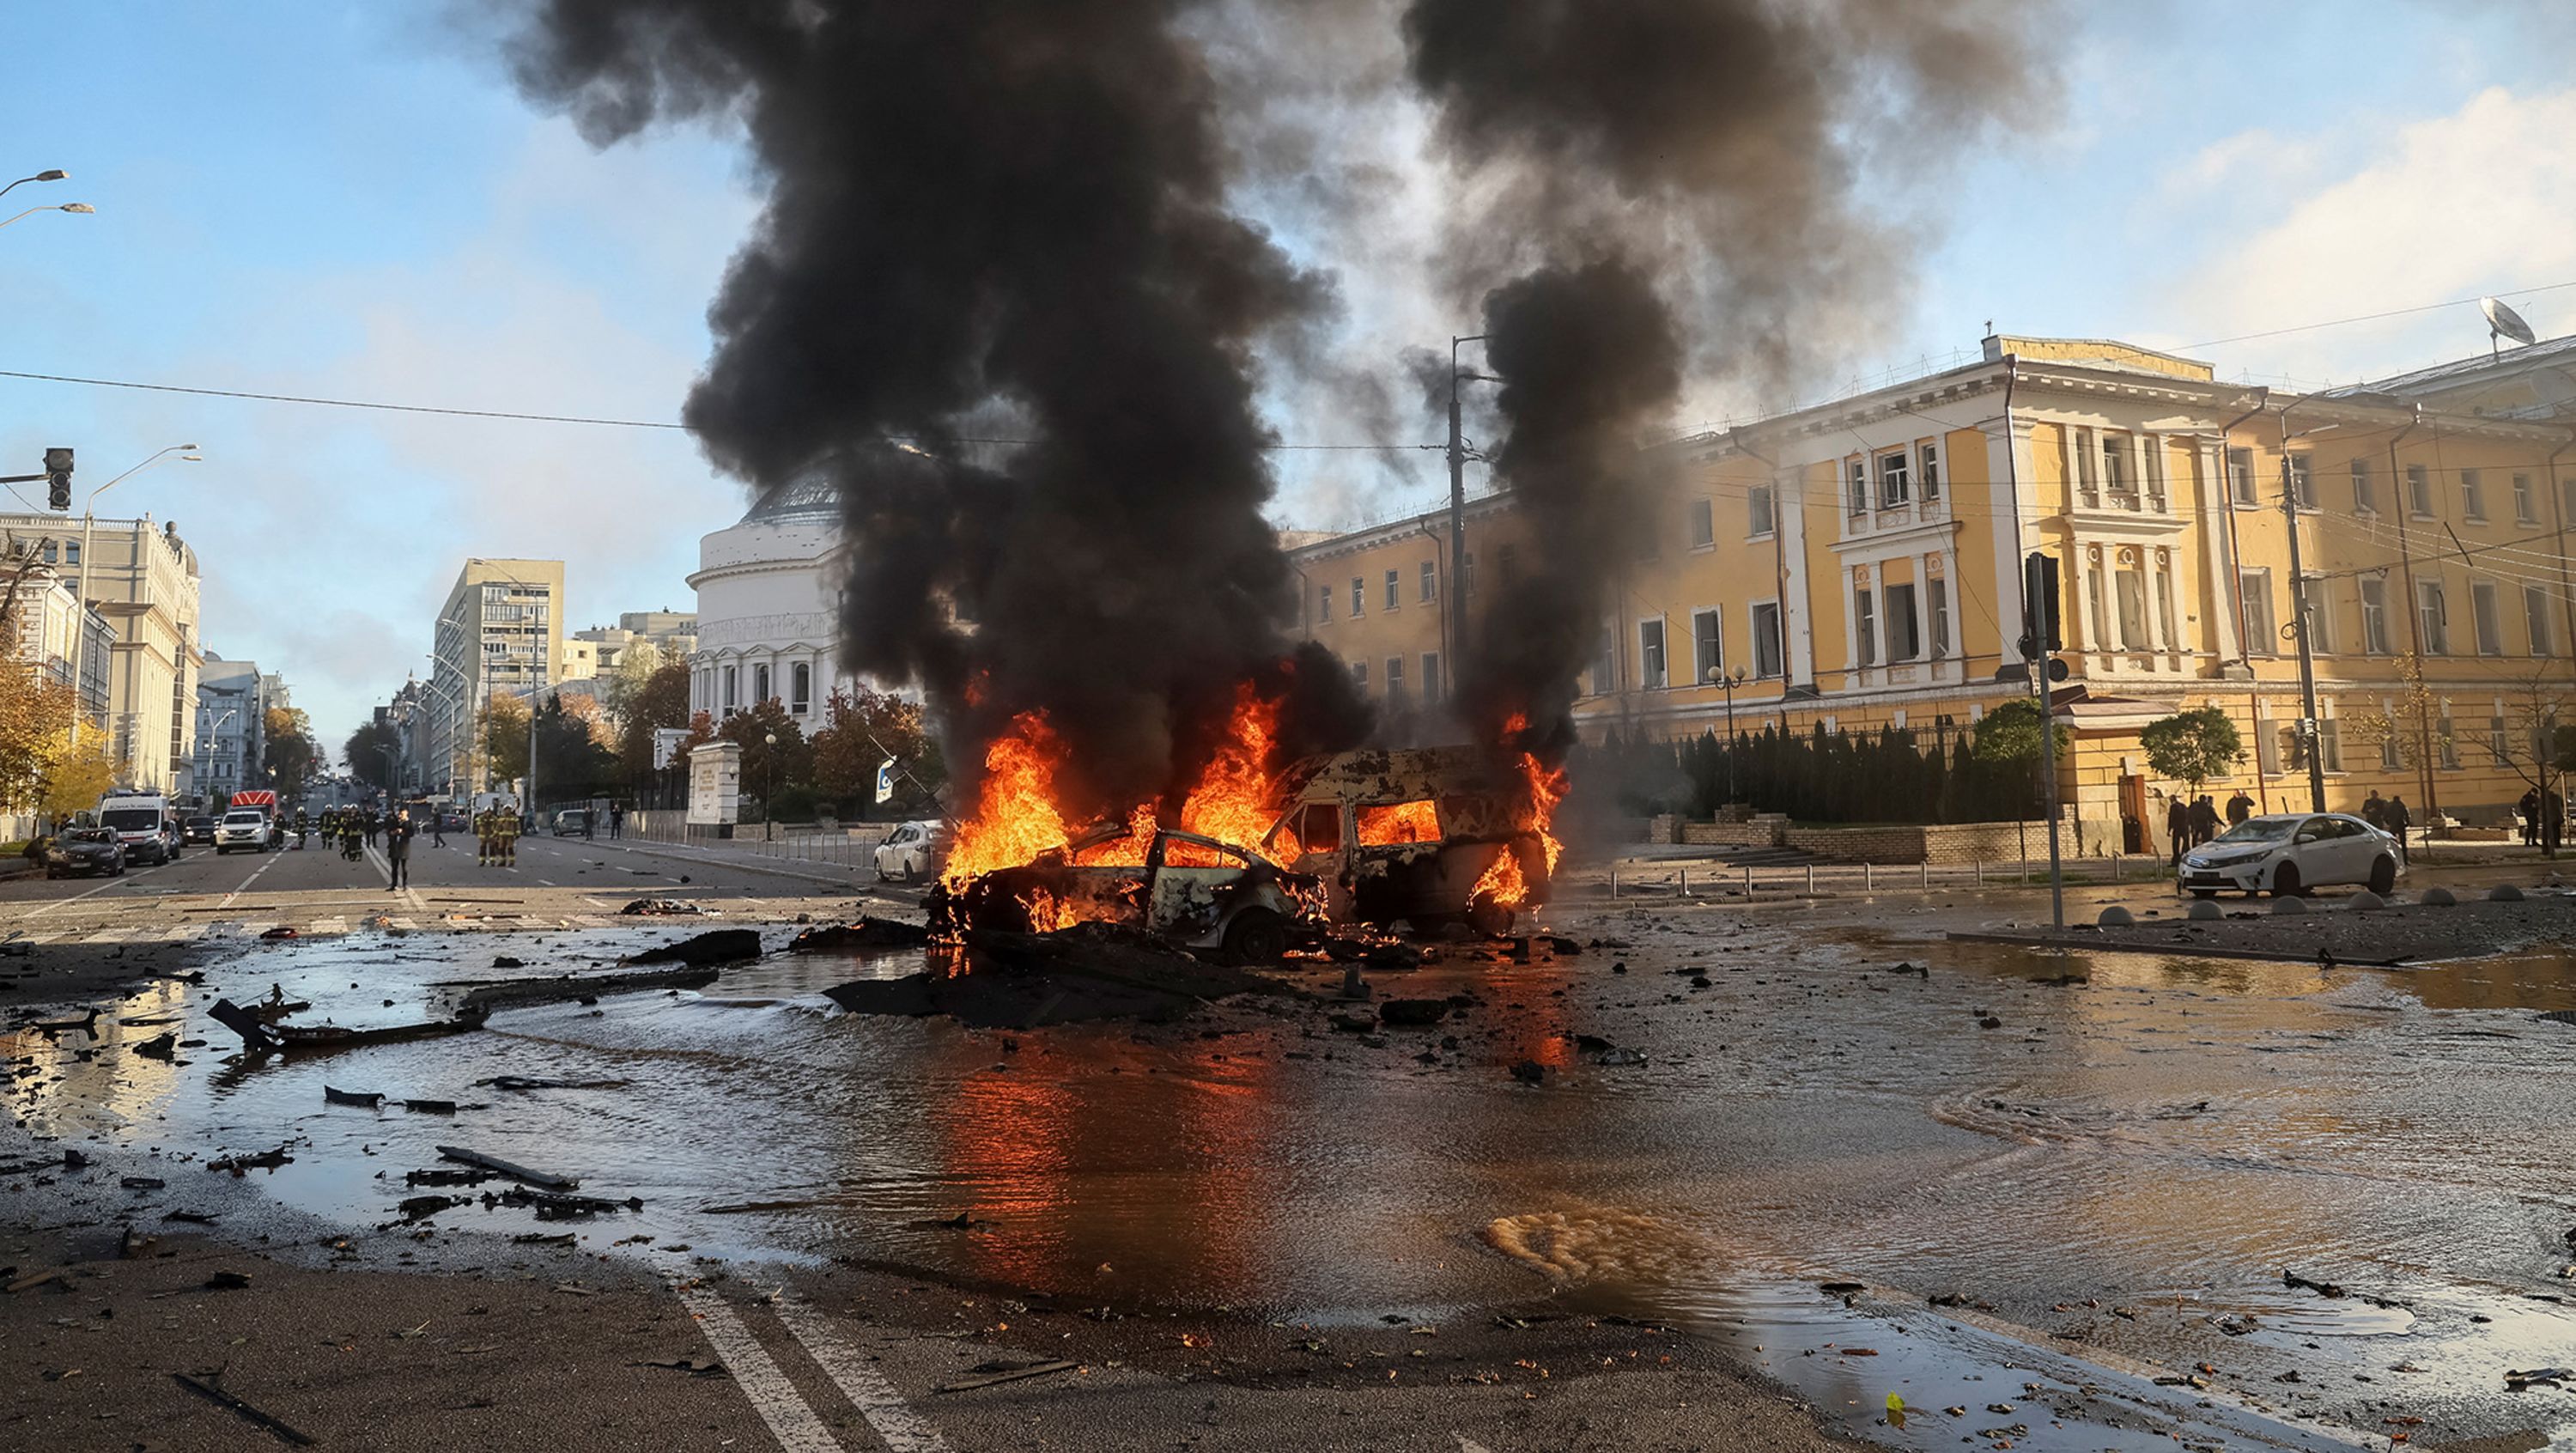 Cars burn after a <a href="index.php?page=&url=https%3A%2F%2Fedition.cnn.com%2F2022%2F10%2F11%2Fpolitics%2Fputin-rage-against-civilians-analysis%2Findex.html" target="_blank">Russian military strike</a> in central Kyiv, Ukraine, on October 10. At least 19 people were killed and more than 100 injured in Russian missile strikes on Kyiv and other Ukrainian cities on Monday as Moscow targeted critical energy infrastructure.